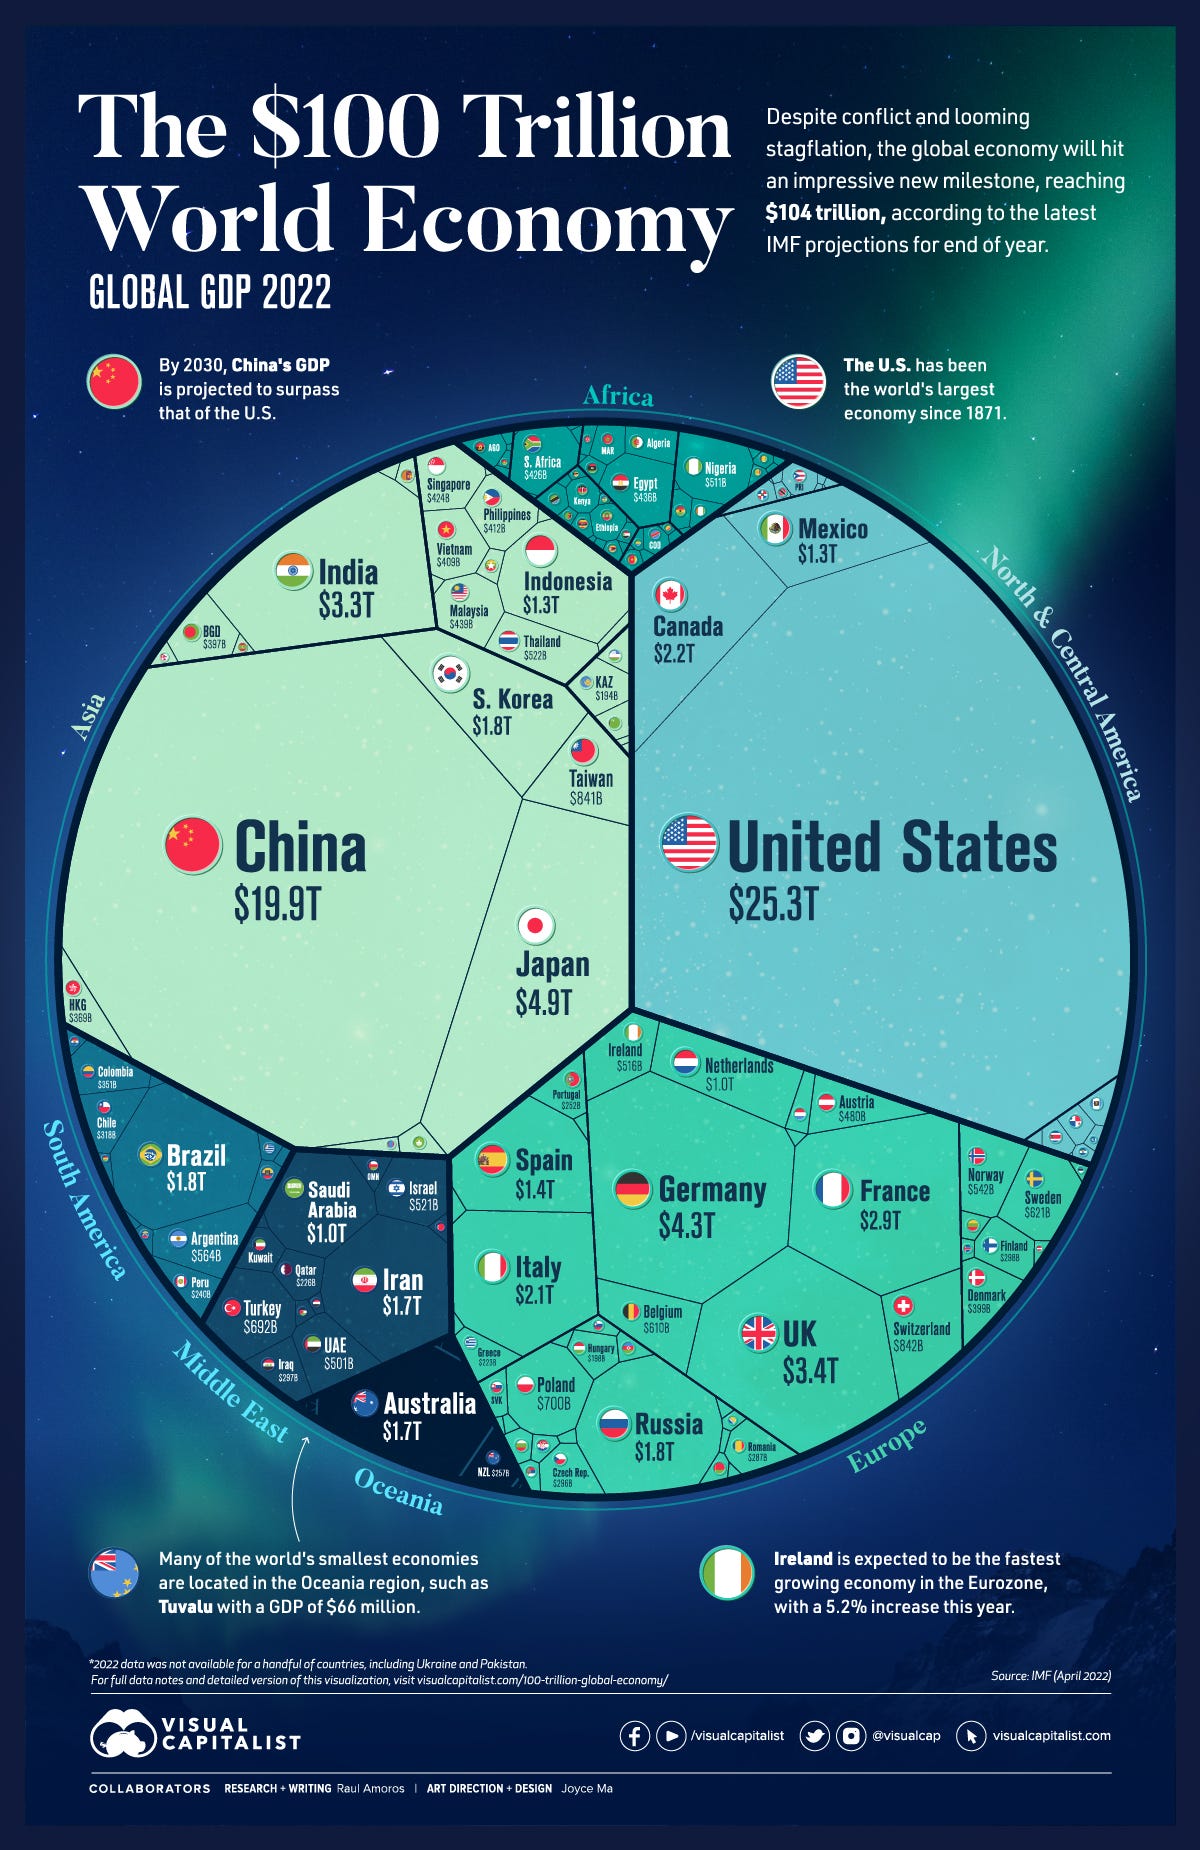 This infographic visualizes the 100 trillion global economy by country GDP